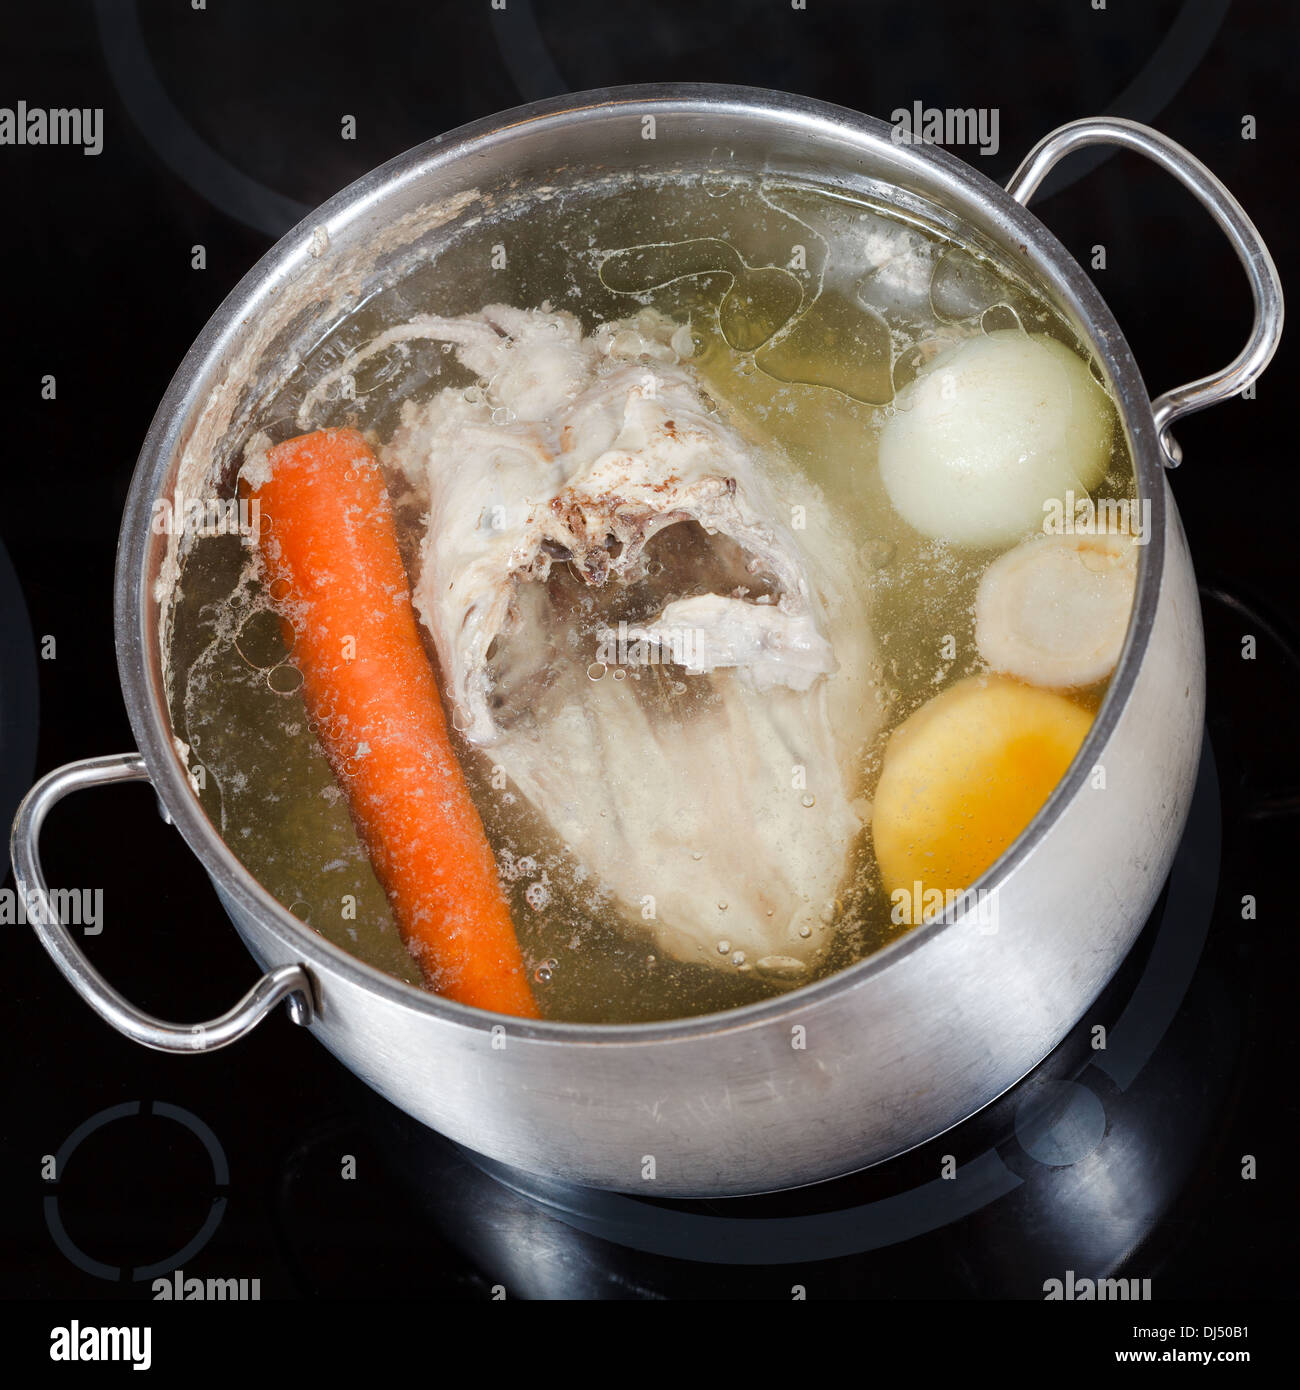 top view of boiling chicken broth with seasoning vegetables in steel pan on glass ceramic cooker Stock Photo